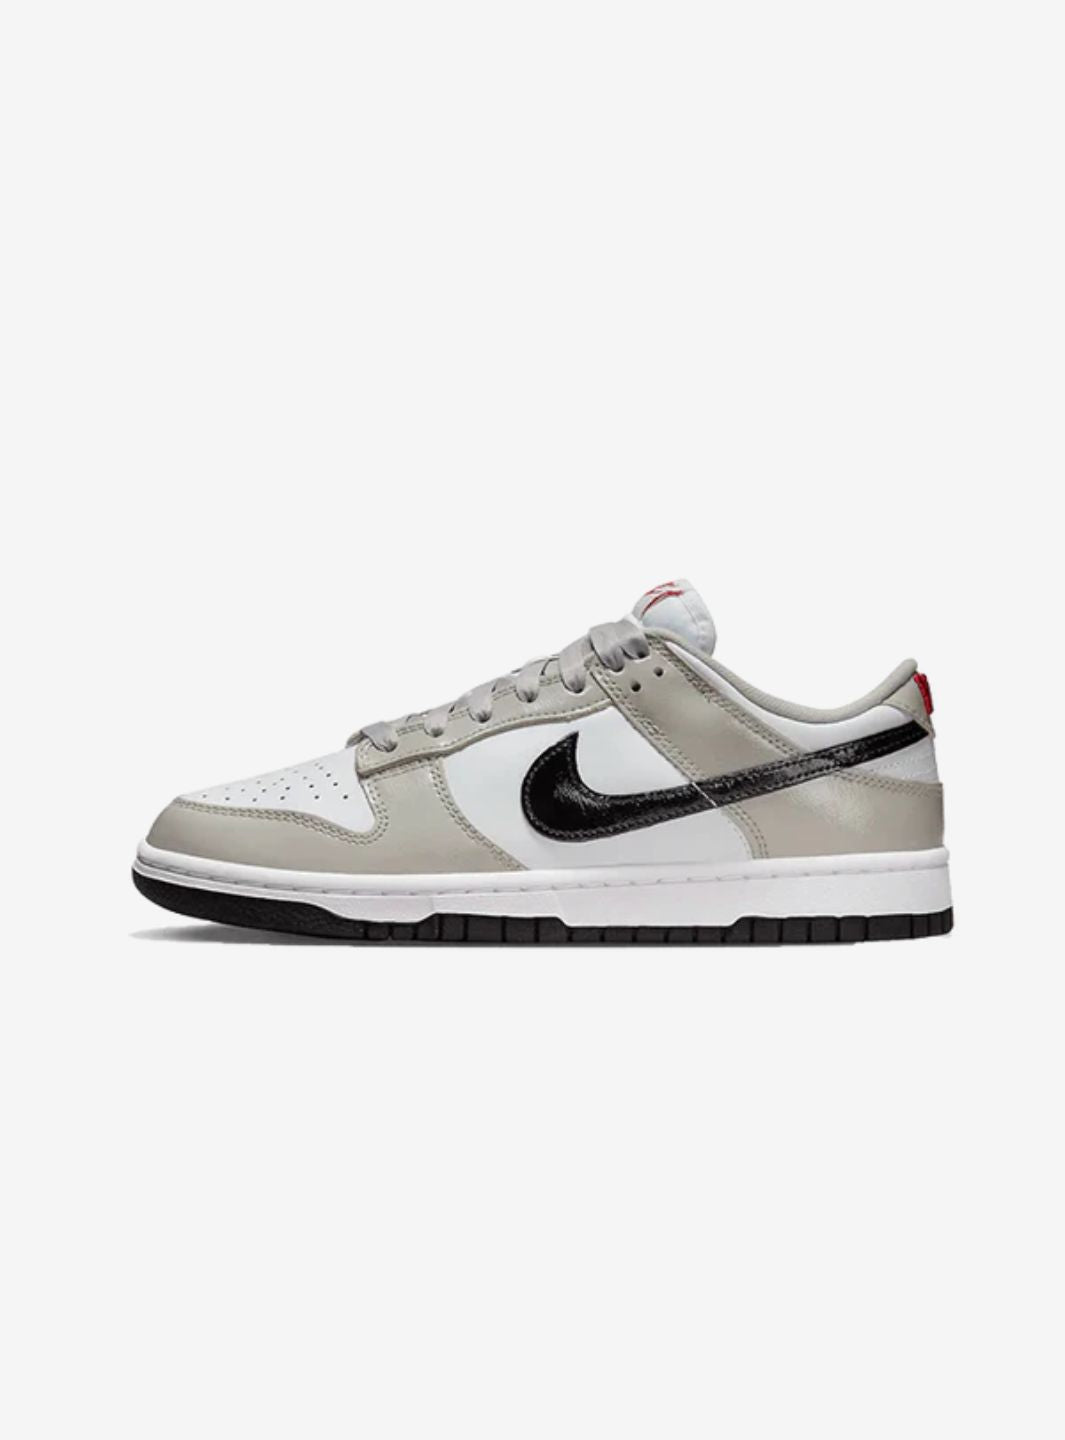 Nike Dunk Low Light Iron Ore - DQ7576-001 | ResellZone